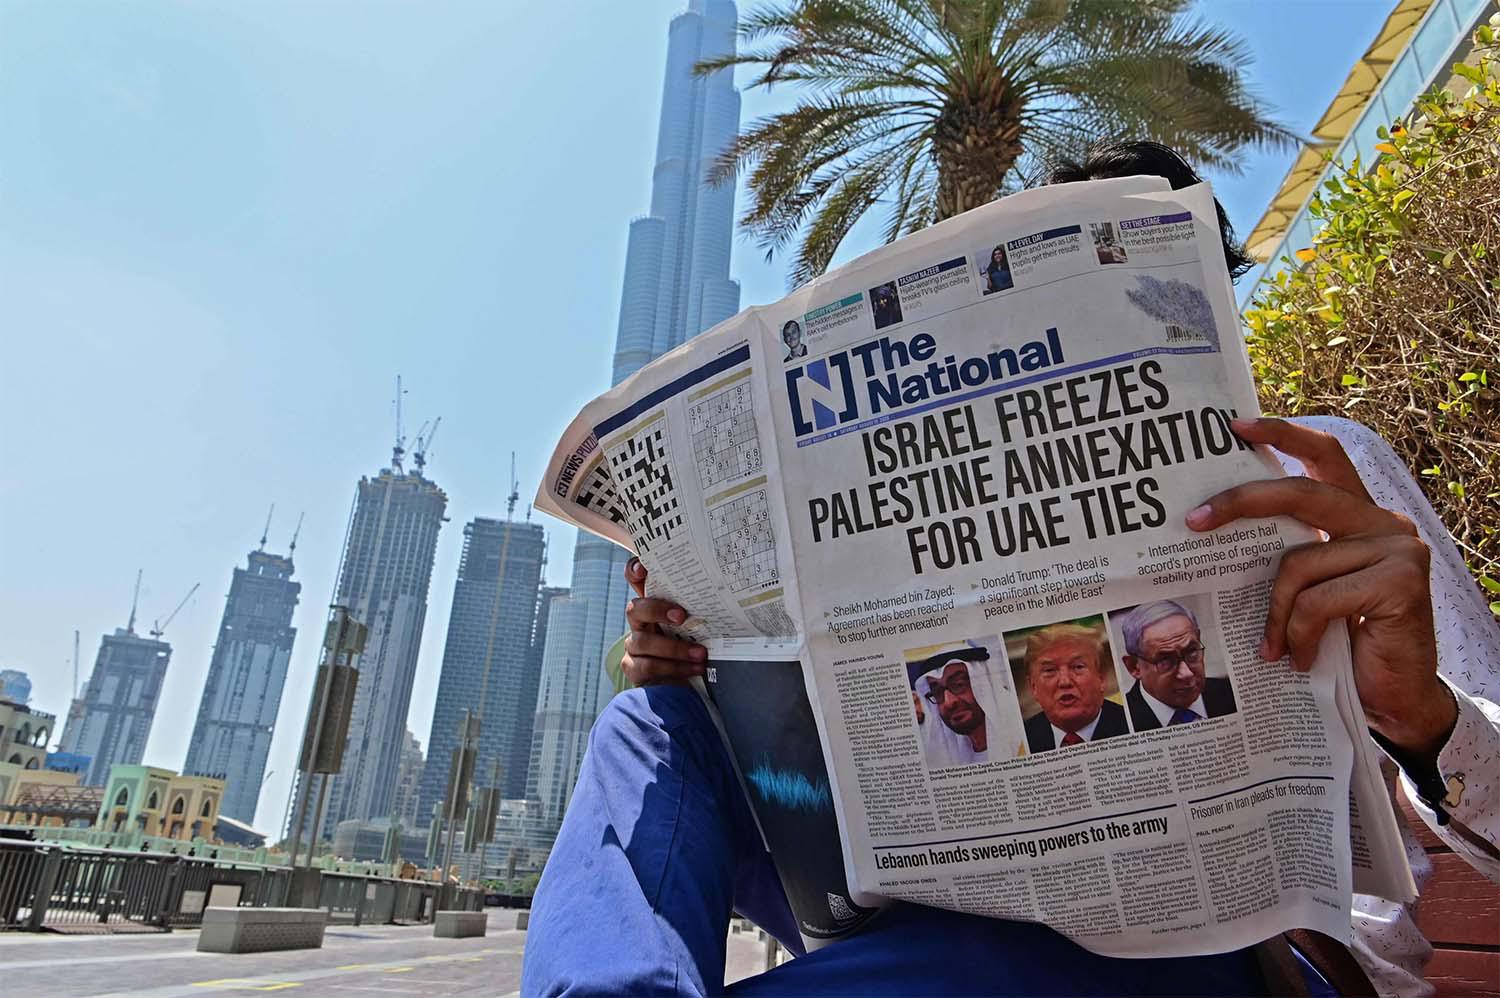 Trump has presented the US-brokered agreement between Israel and UAE as a major diplomatic achievement